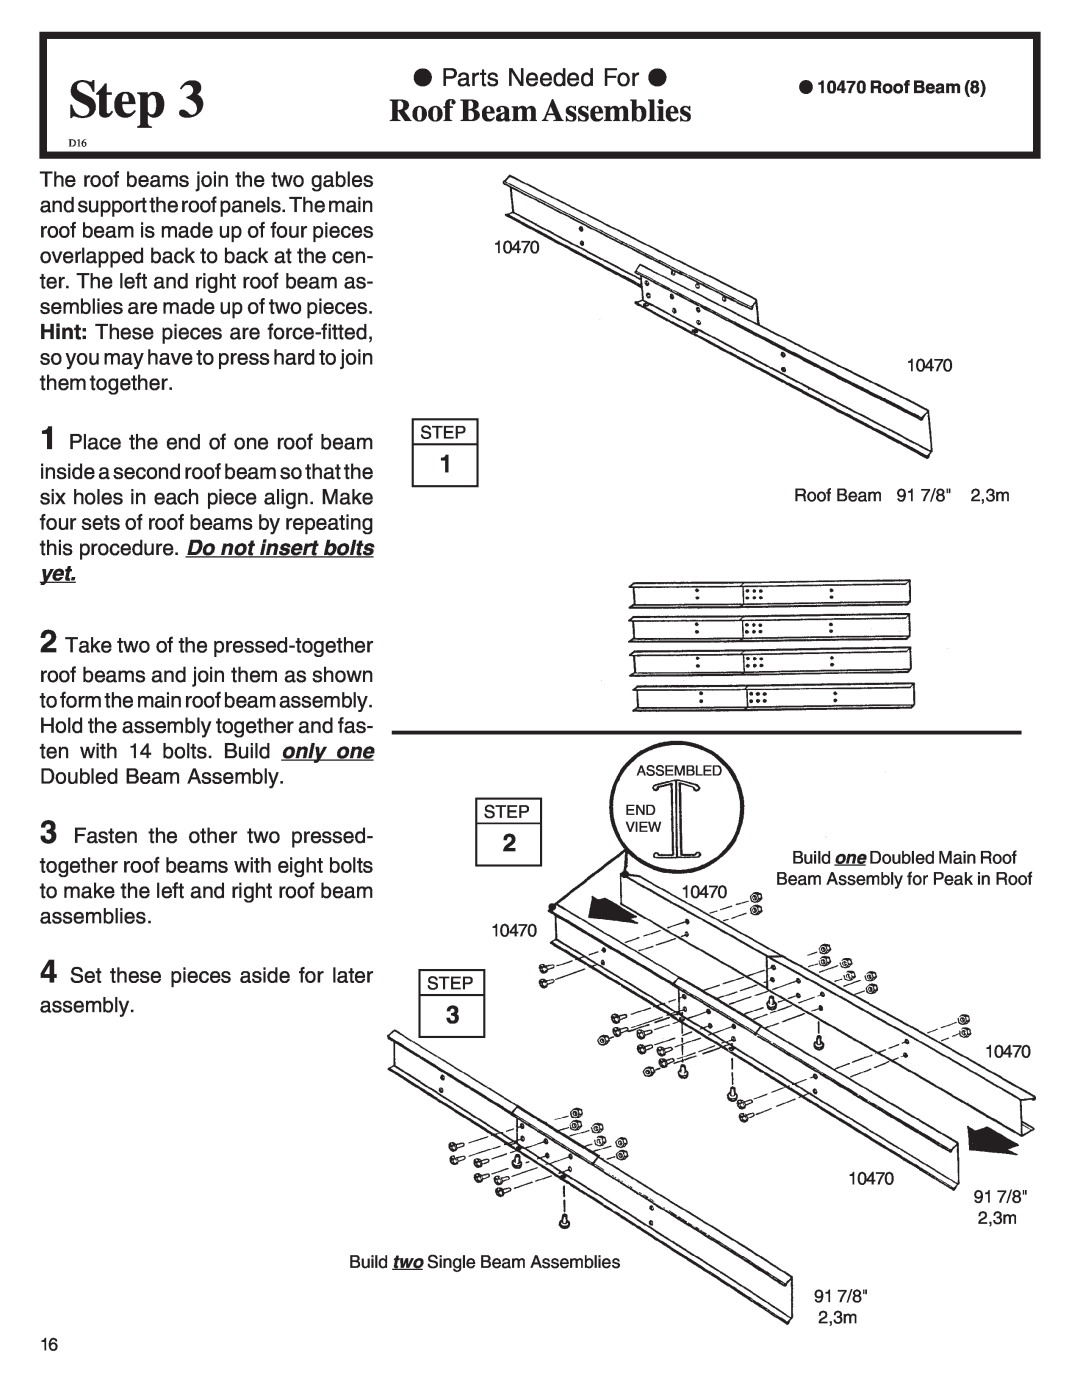 Arrow Plastic SA108-A, NW108-A, PD108-A, EN108-A, HM108-A, NP108, MN108-A, VN108-A Roof Beam Assemblies, Step, Parts Needed For 